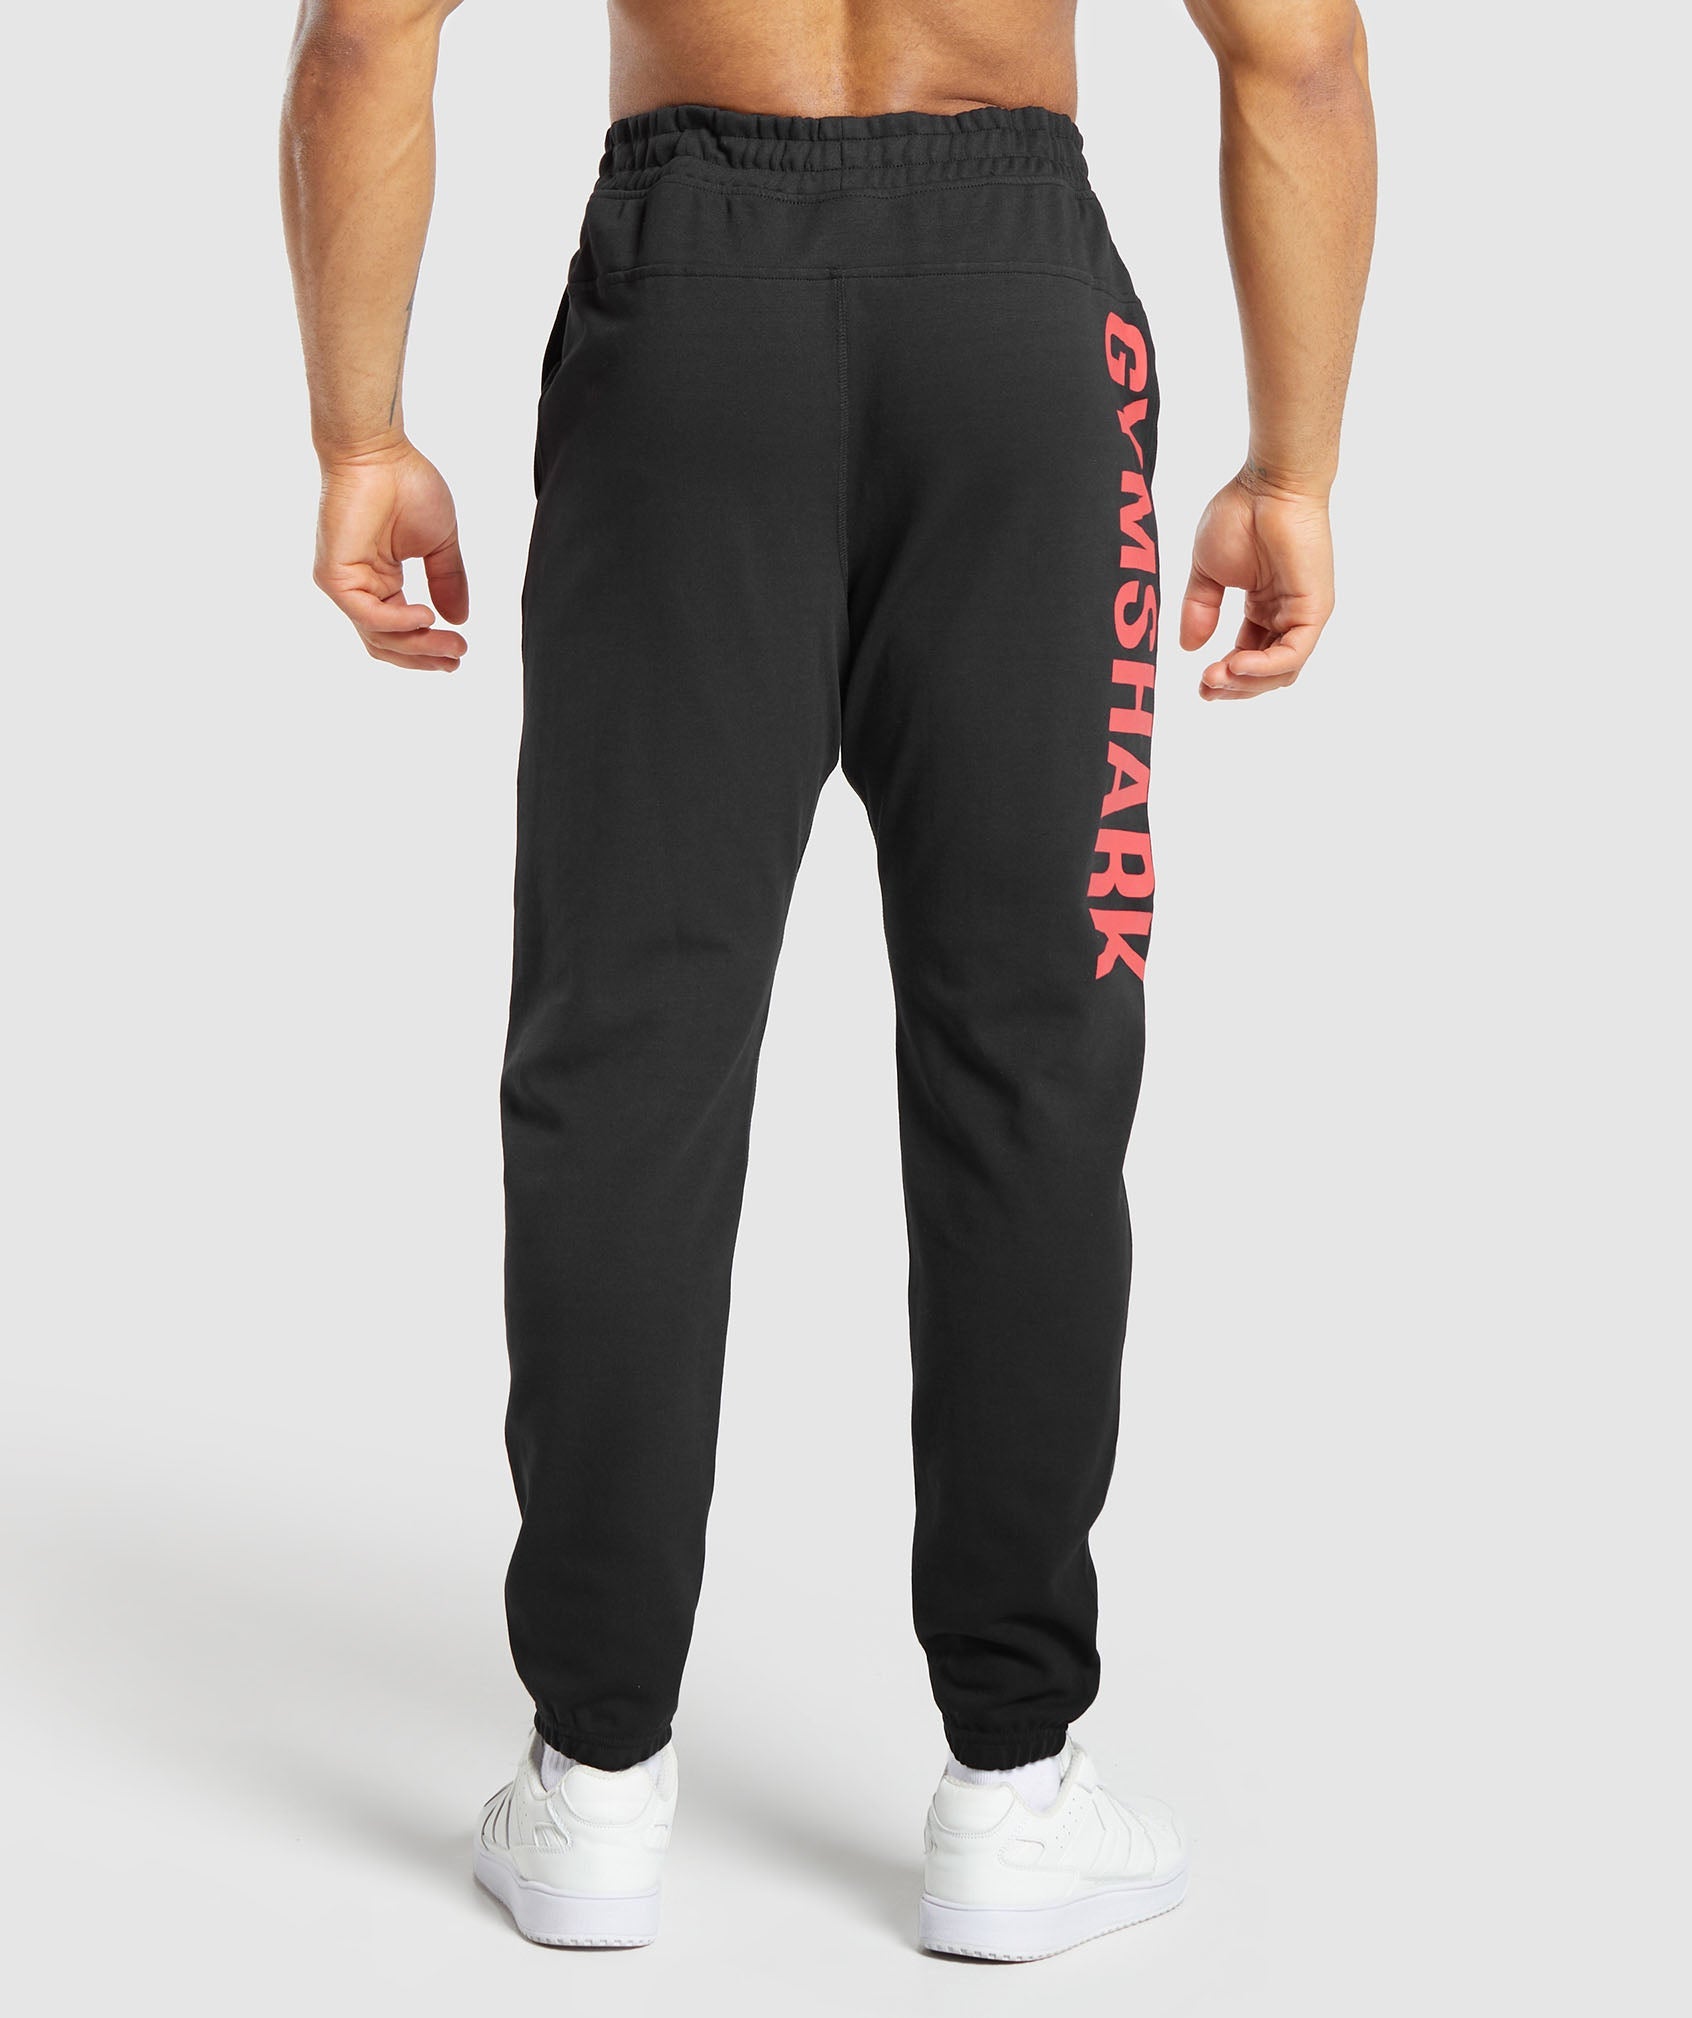 Impact Joggers in Black/Vivid Red - view 3